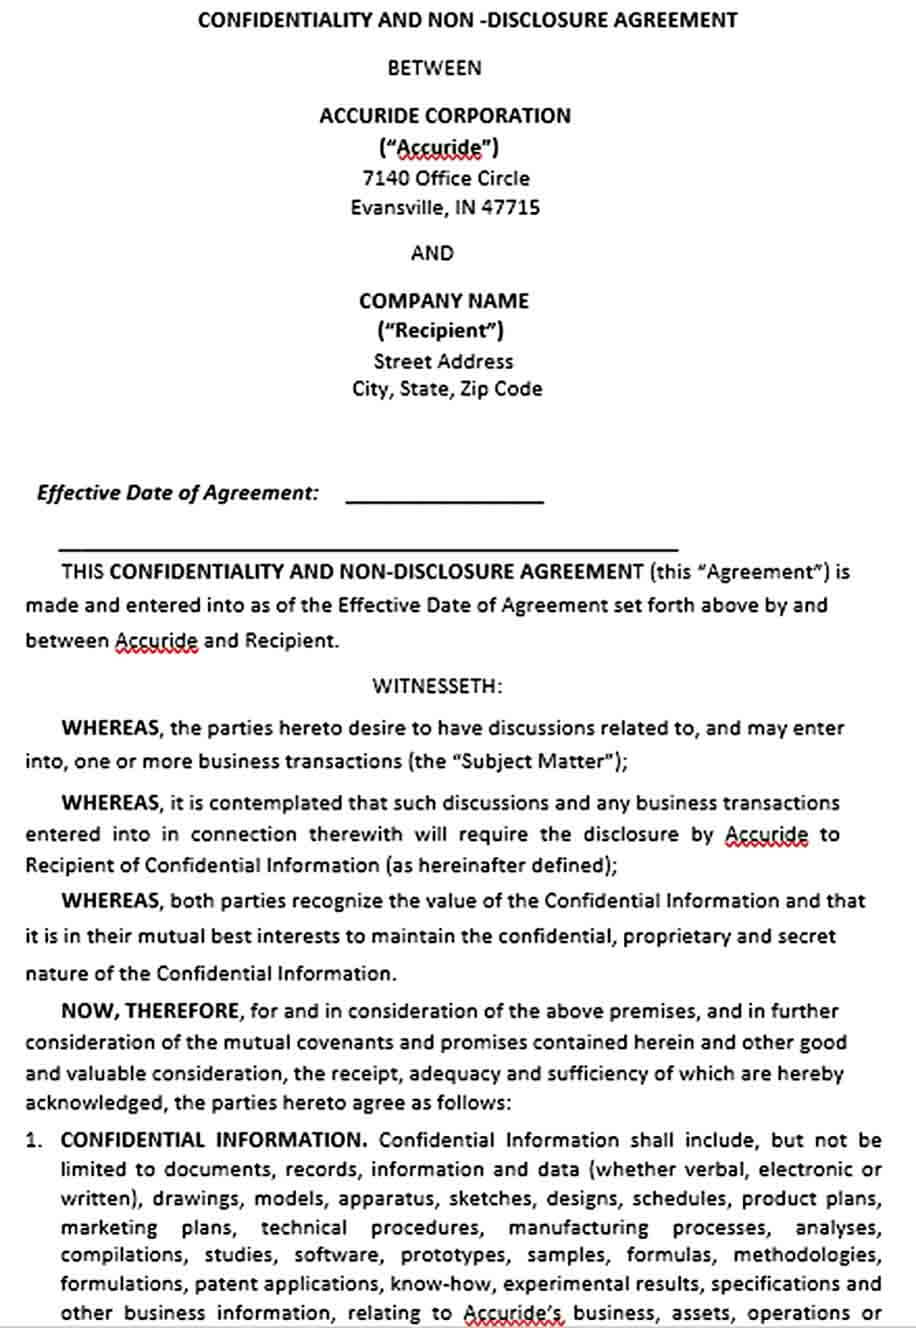 Sample Non Disclosure Confidentiality Agreement Form